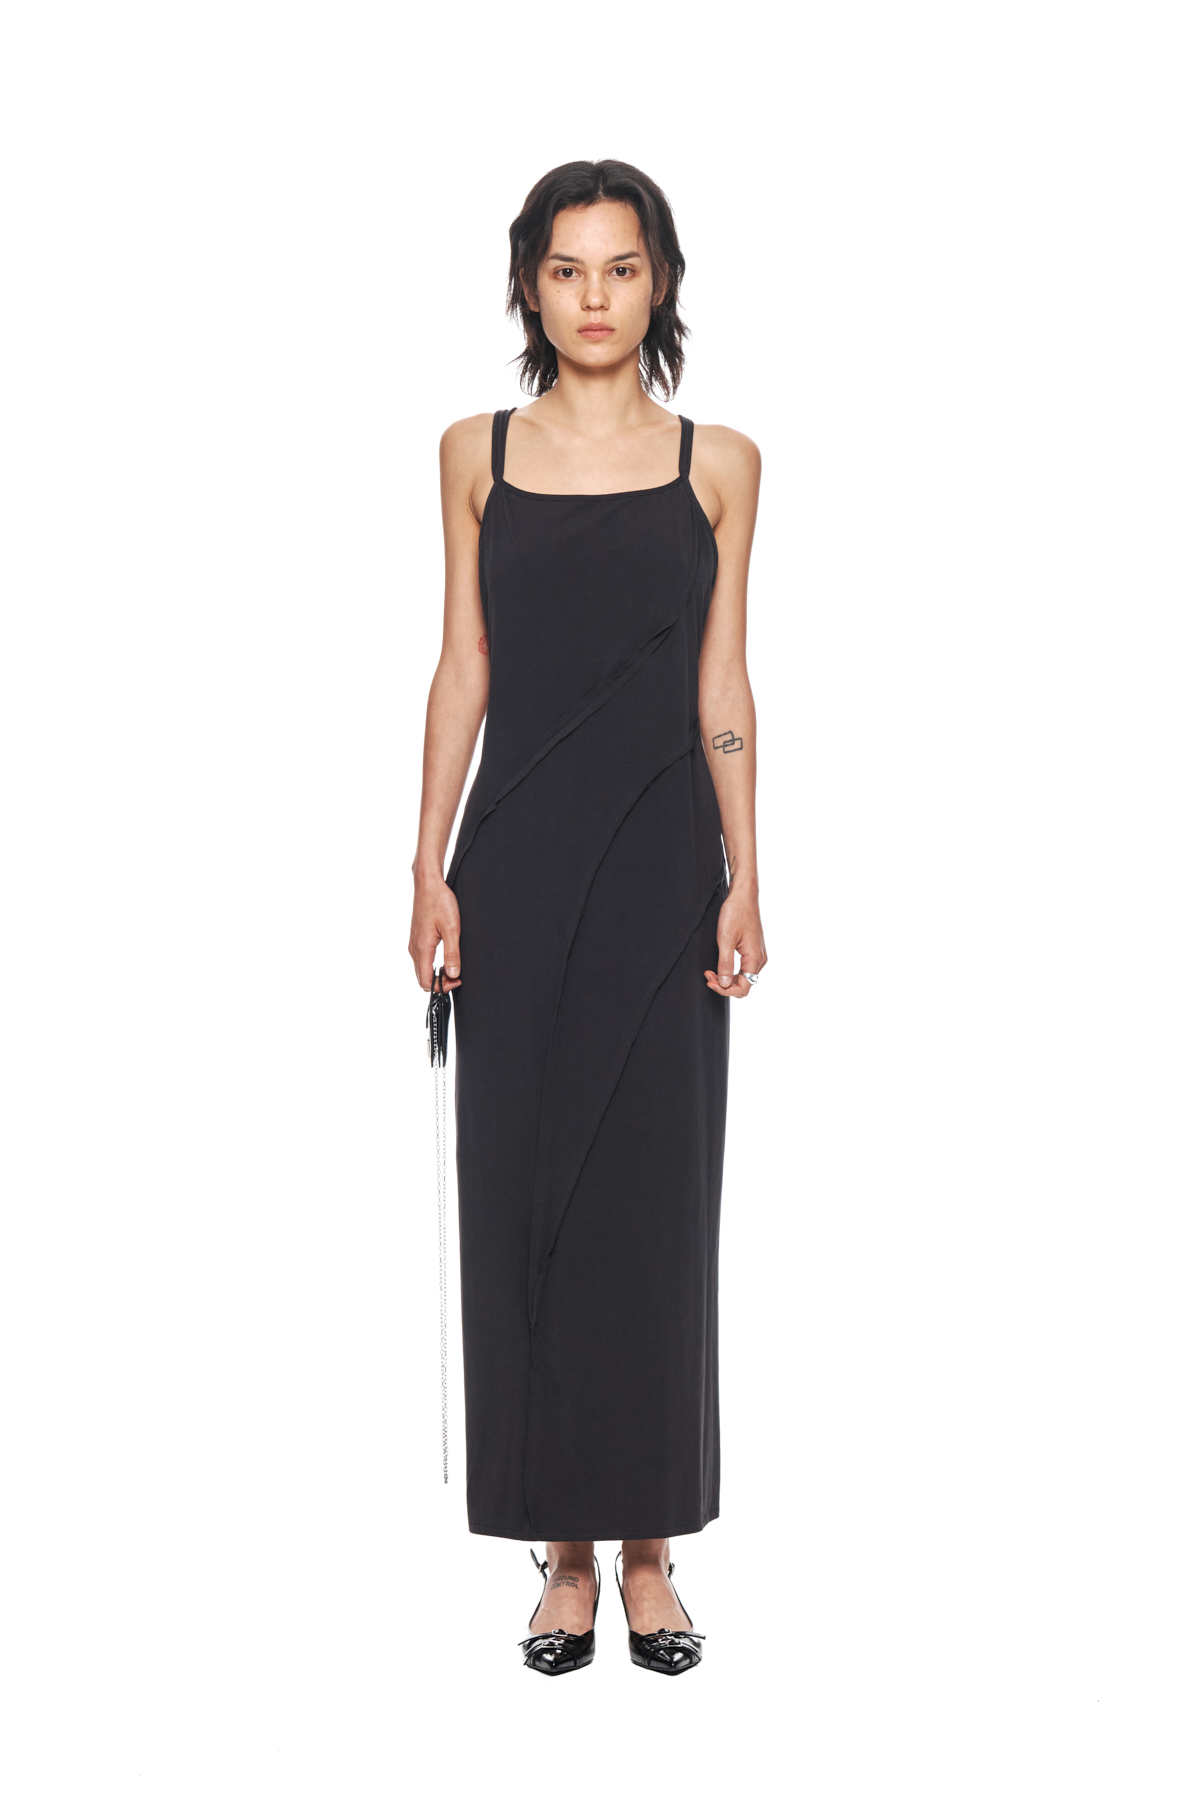 CUT OUT LAYERED MAXI DRESS IN CHARCOAL